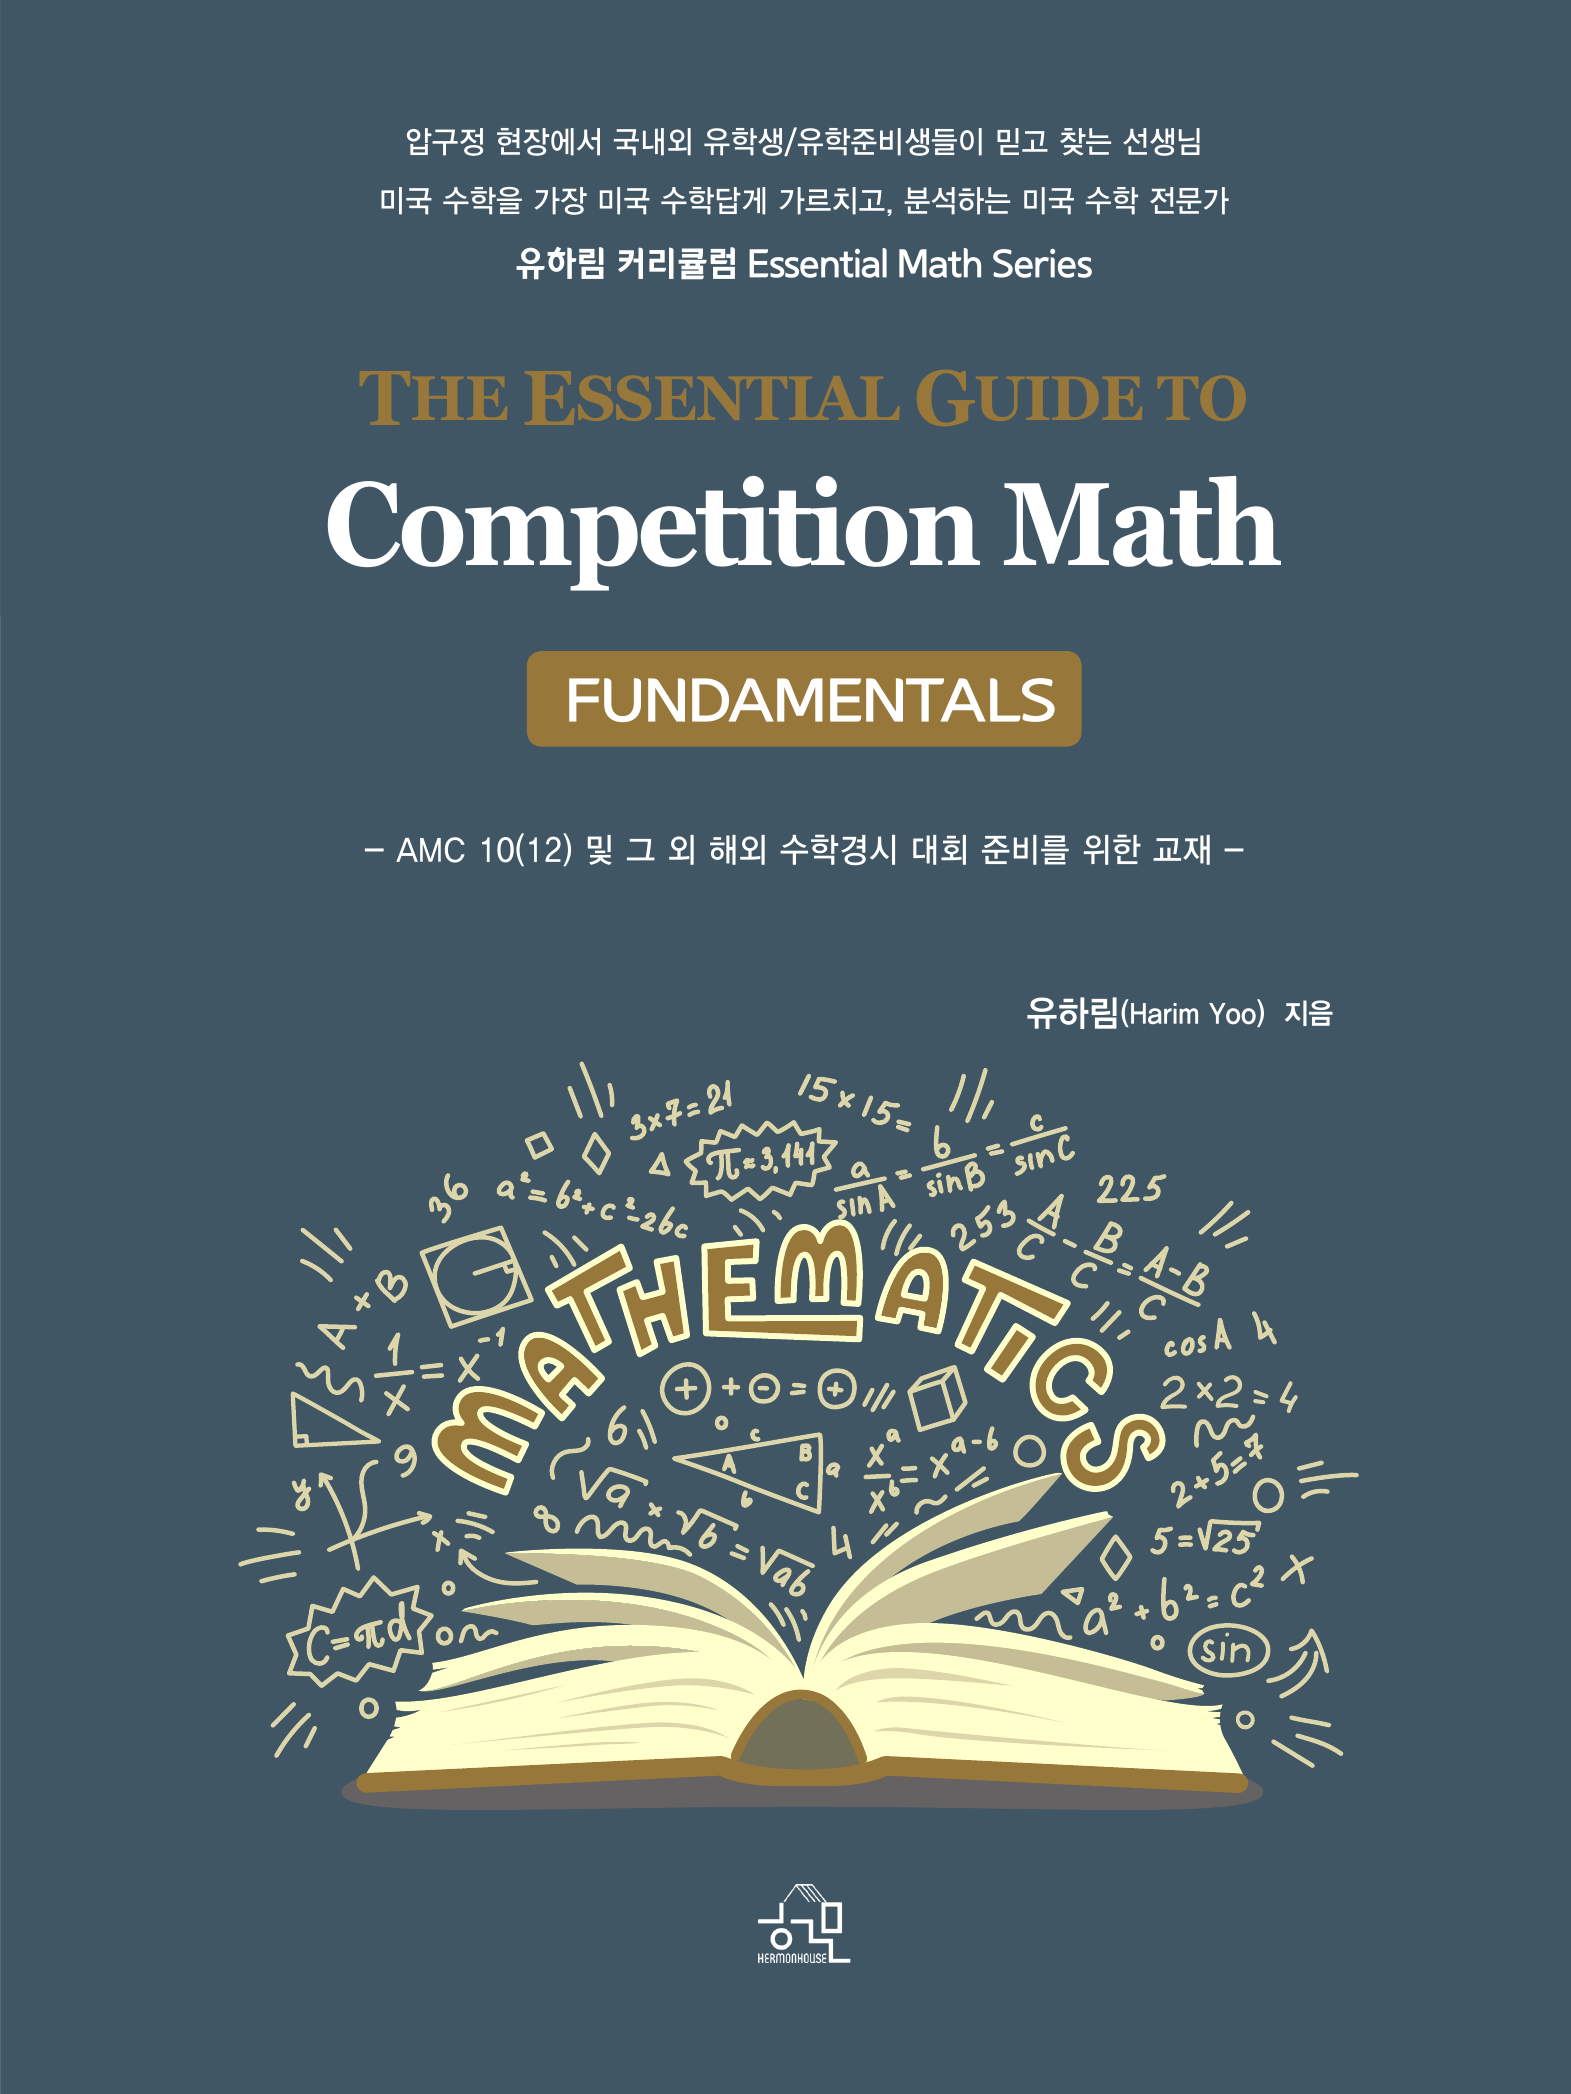 THE ESSENTIAL GUIDE TO Copetition Math